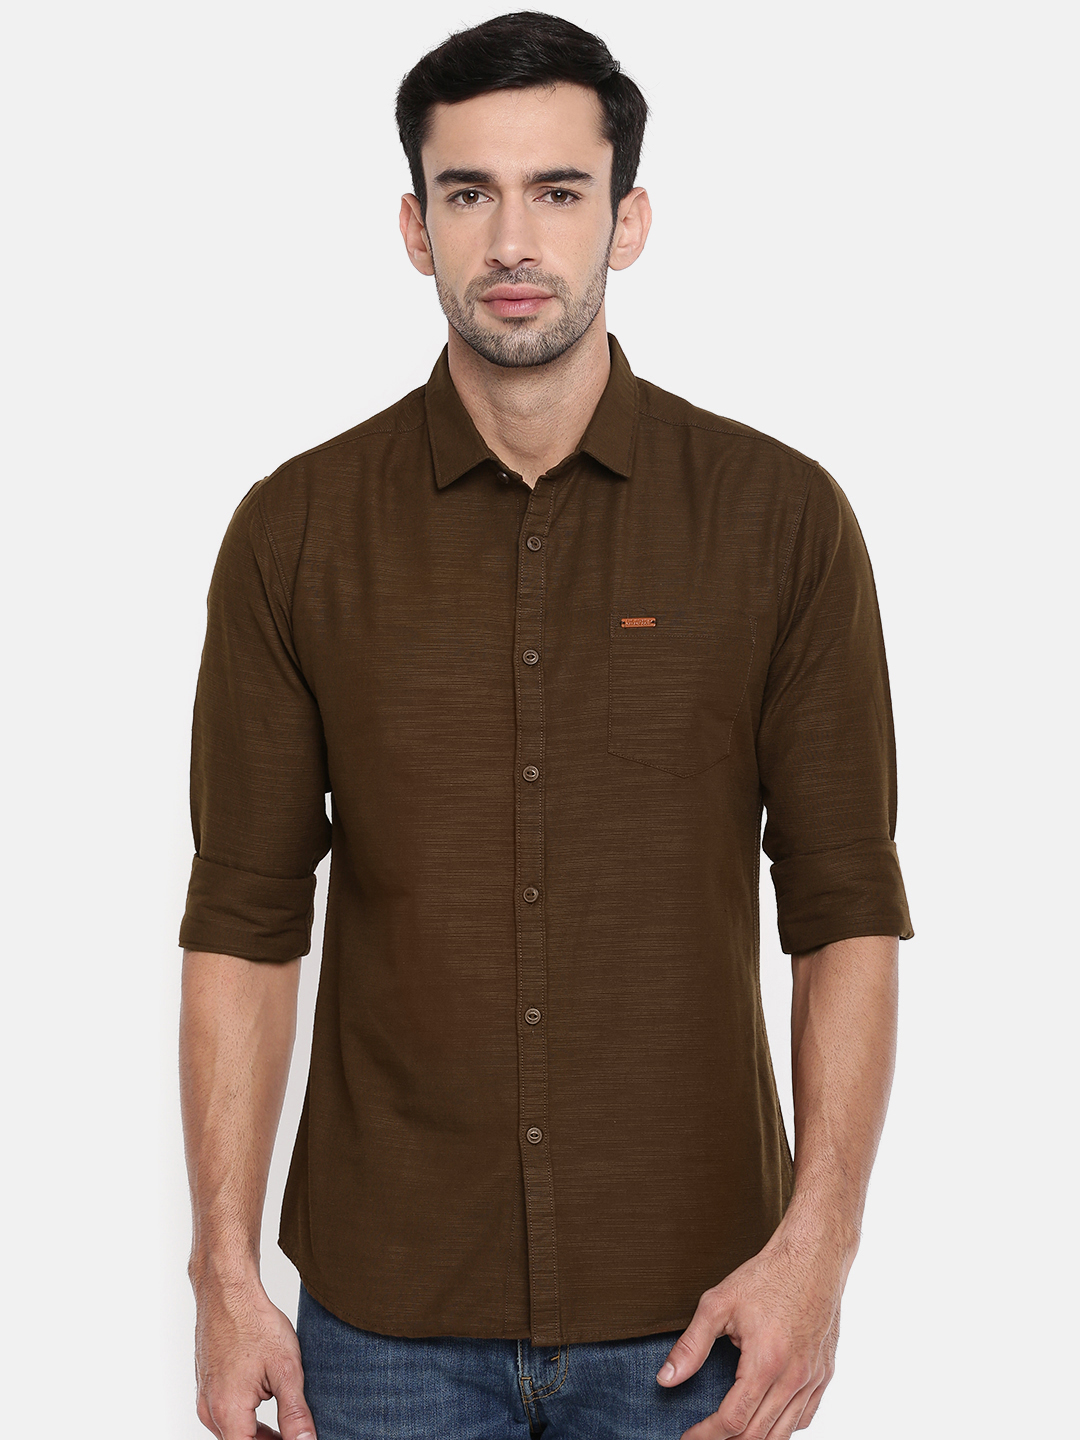 Brown shirts for men – How to best combine a brown shirt